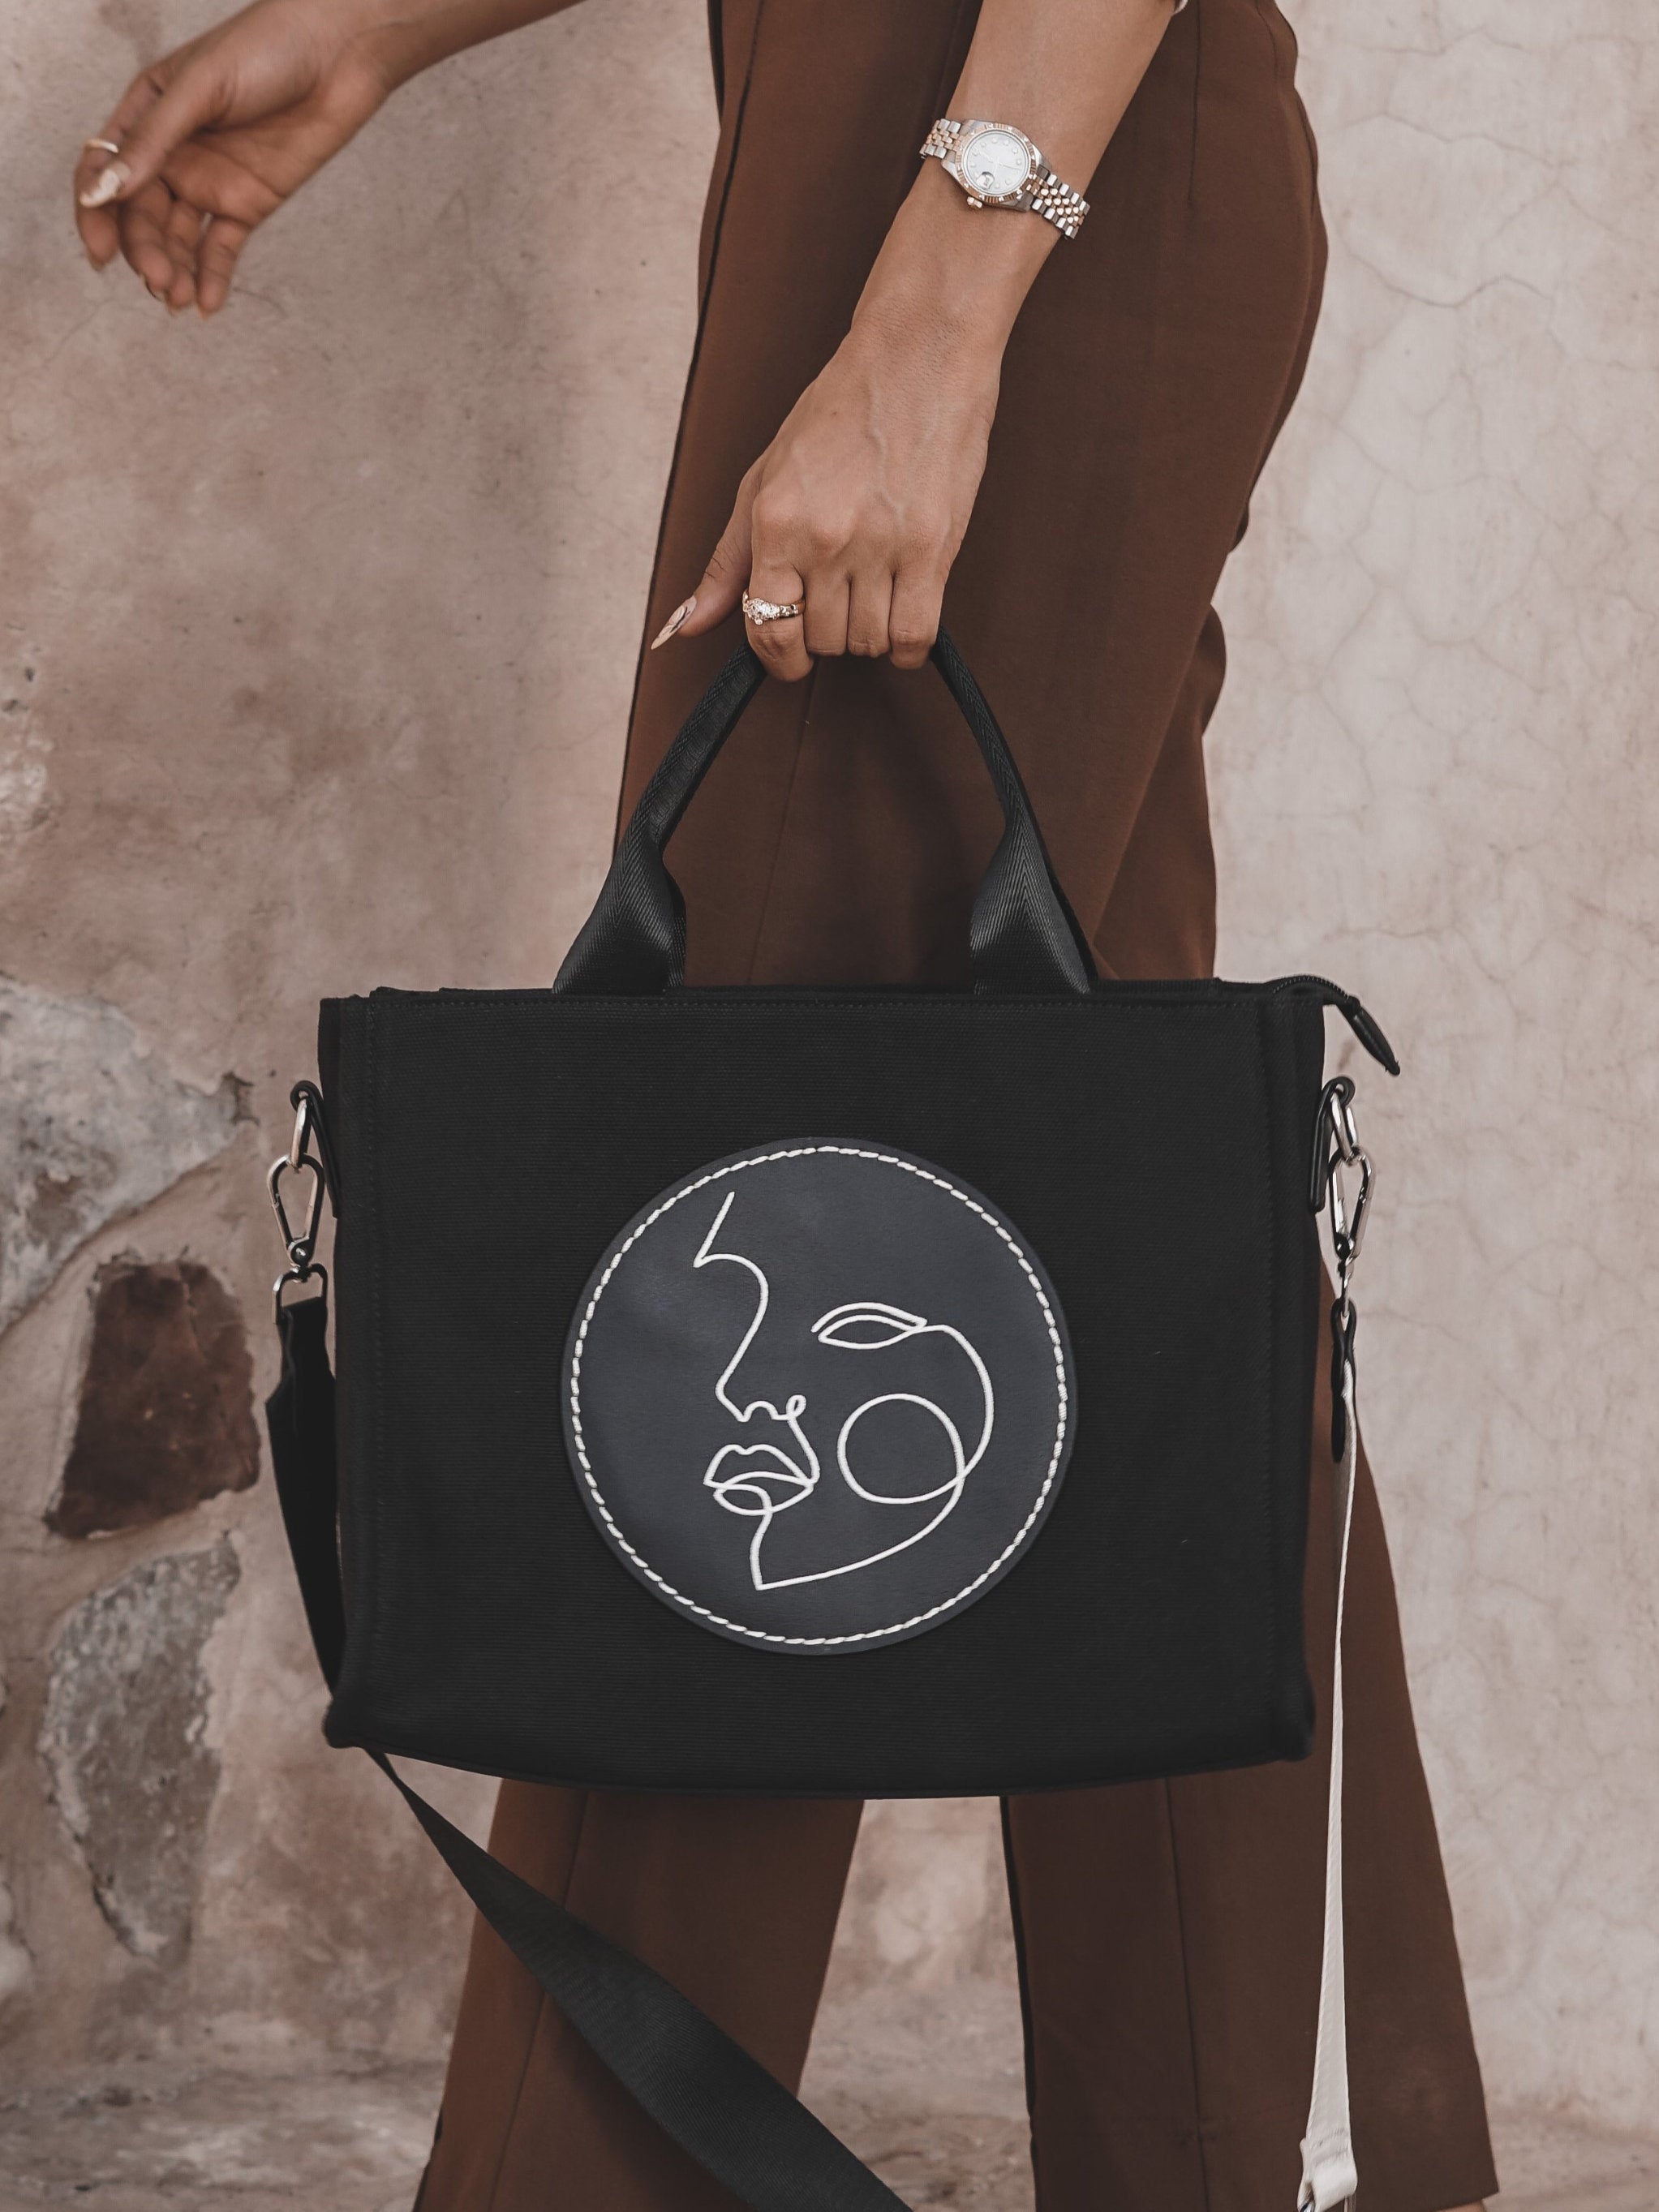 The Unseen Tote Bag